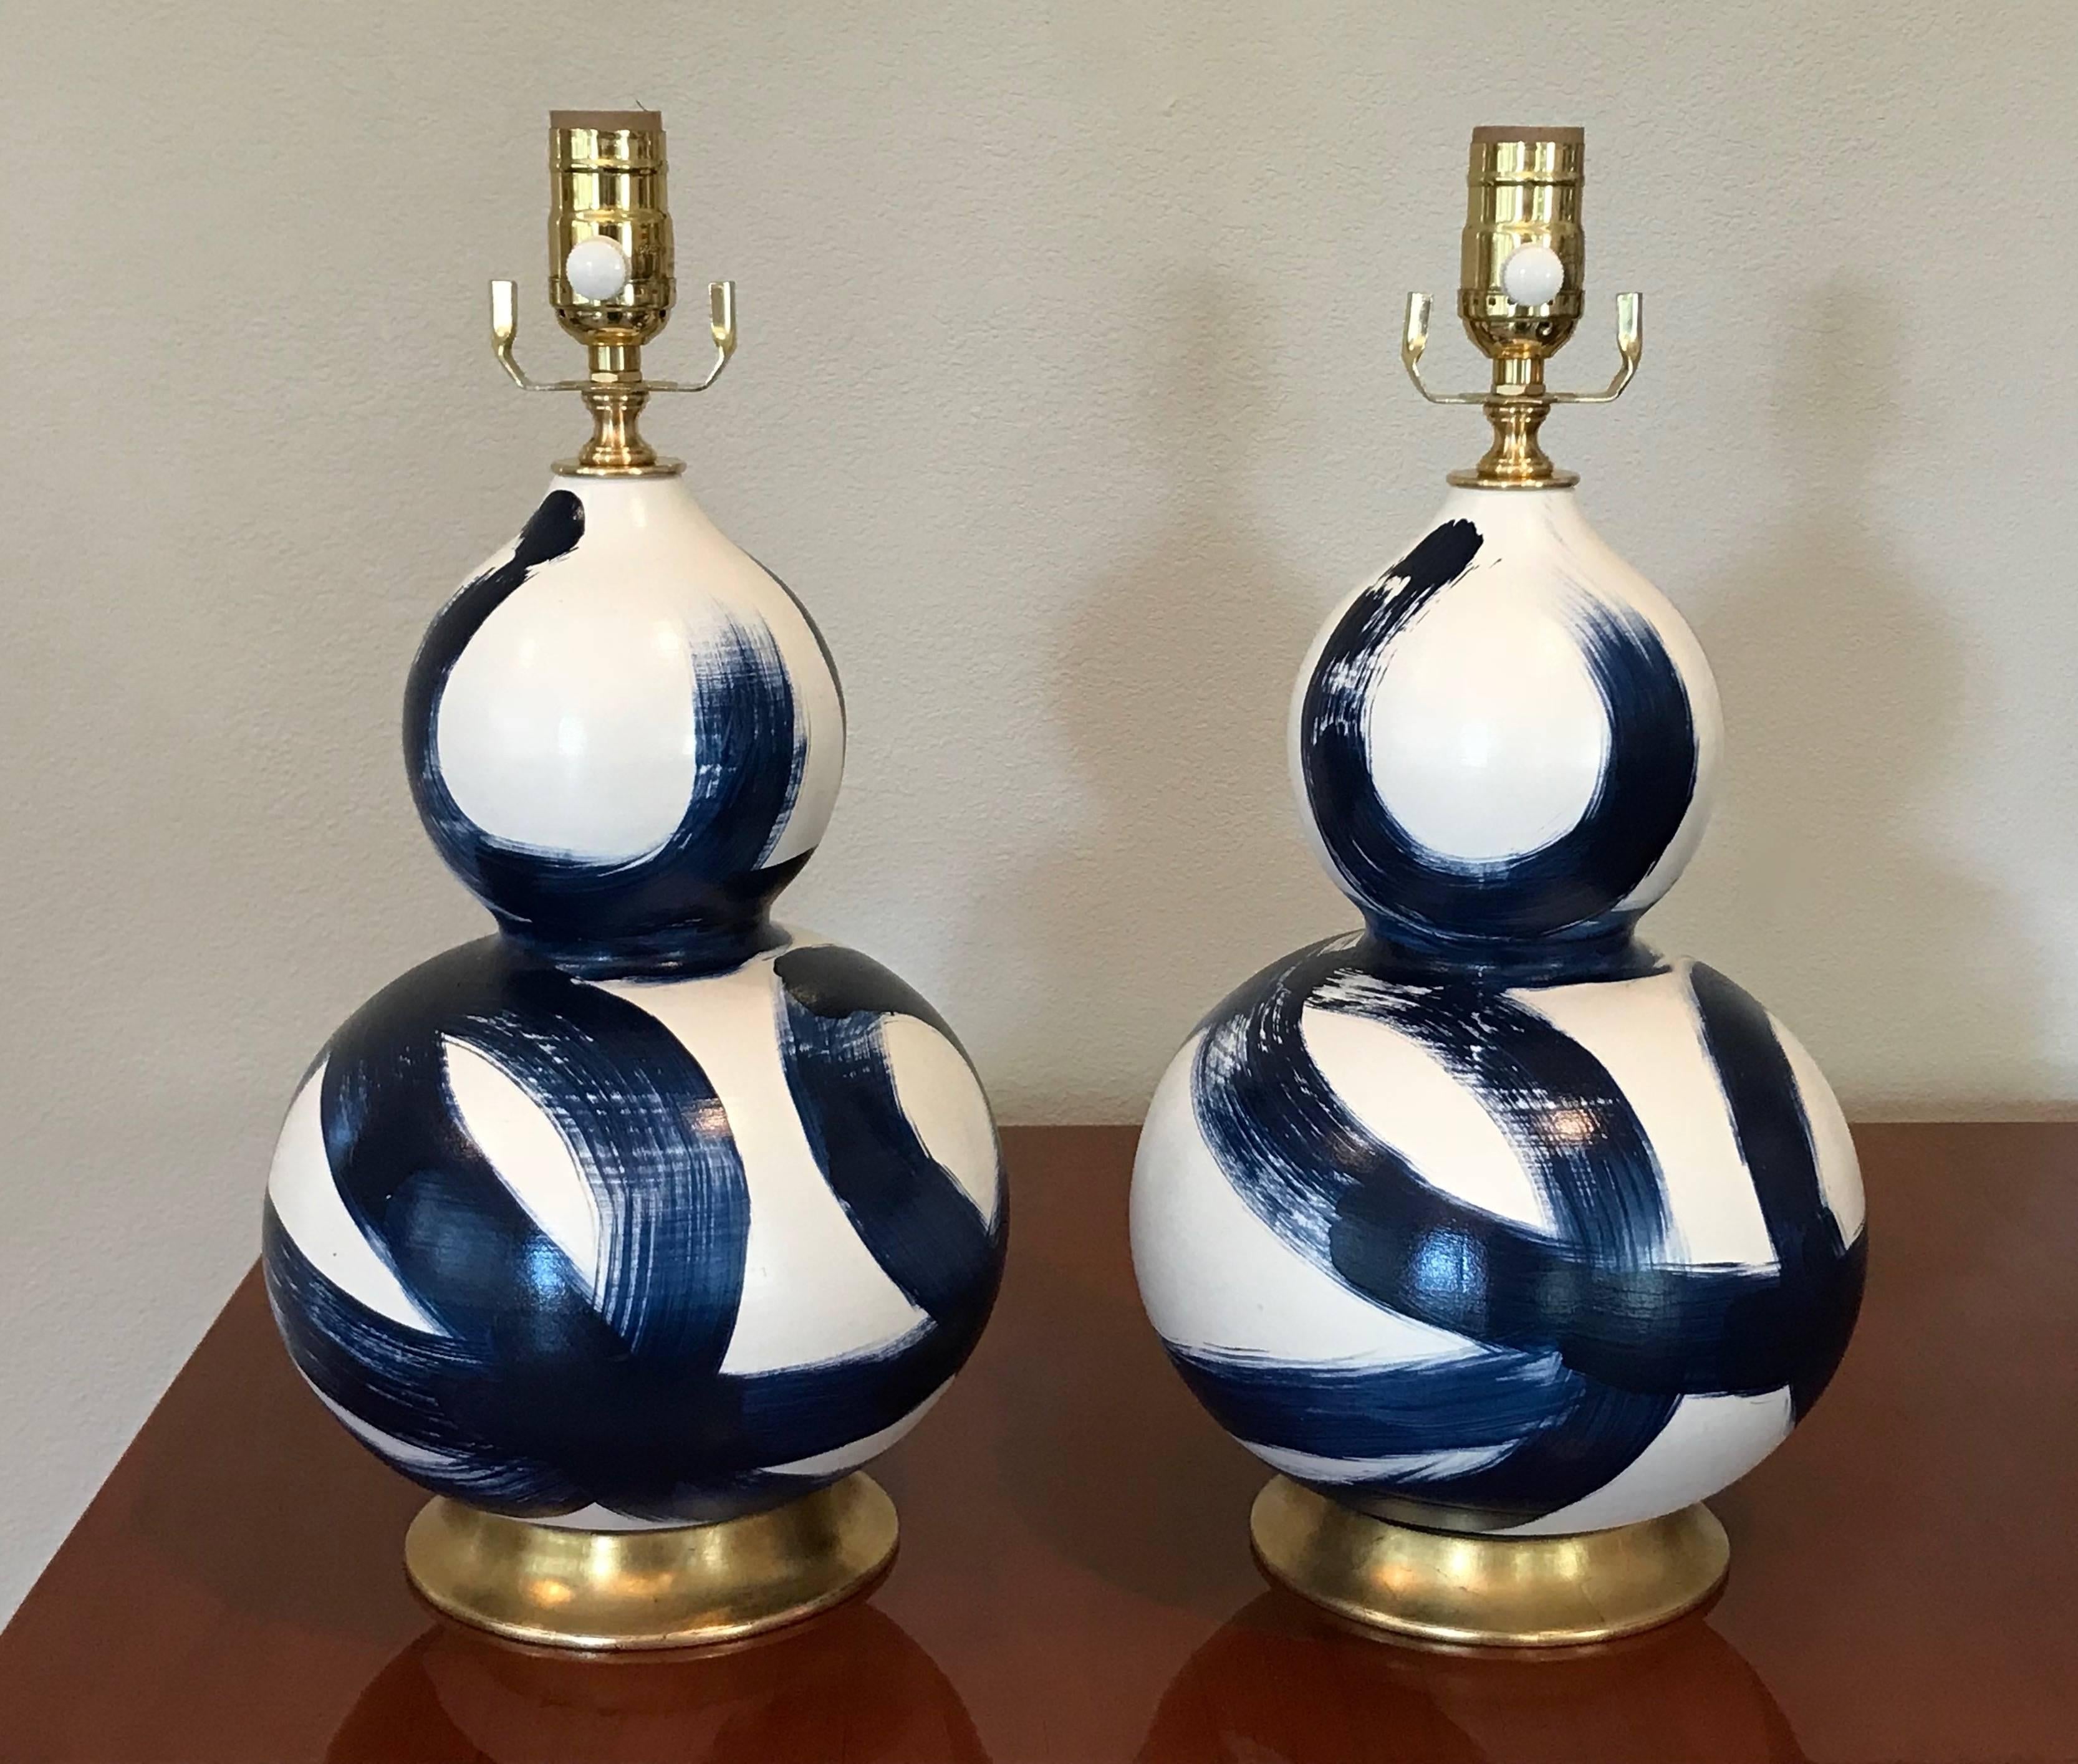 A smaller scale pair of ceramic lamps on turned wood bases in a gilt finish. Lamp bodies are bisque-fired with a matte off-white glaze and dark blue abstract blue brushed design, applied by hand. Newly wired for US with brass fittings and a full